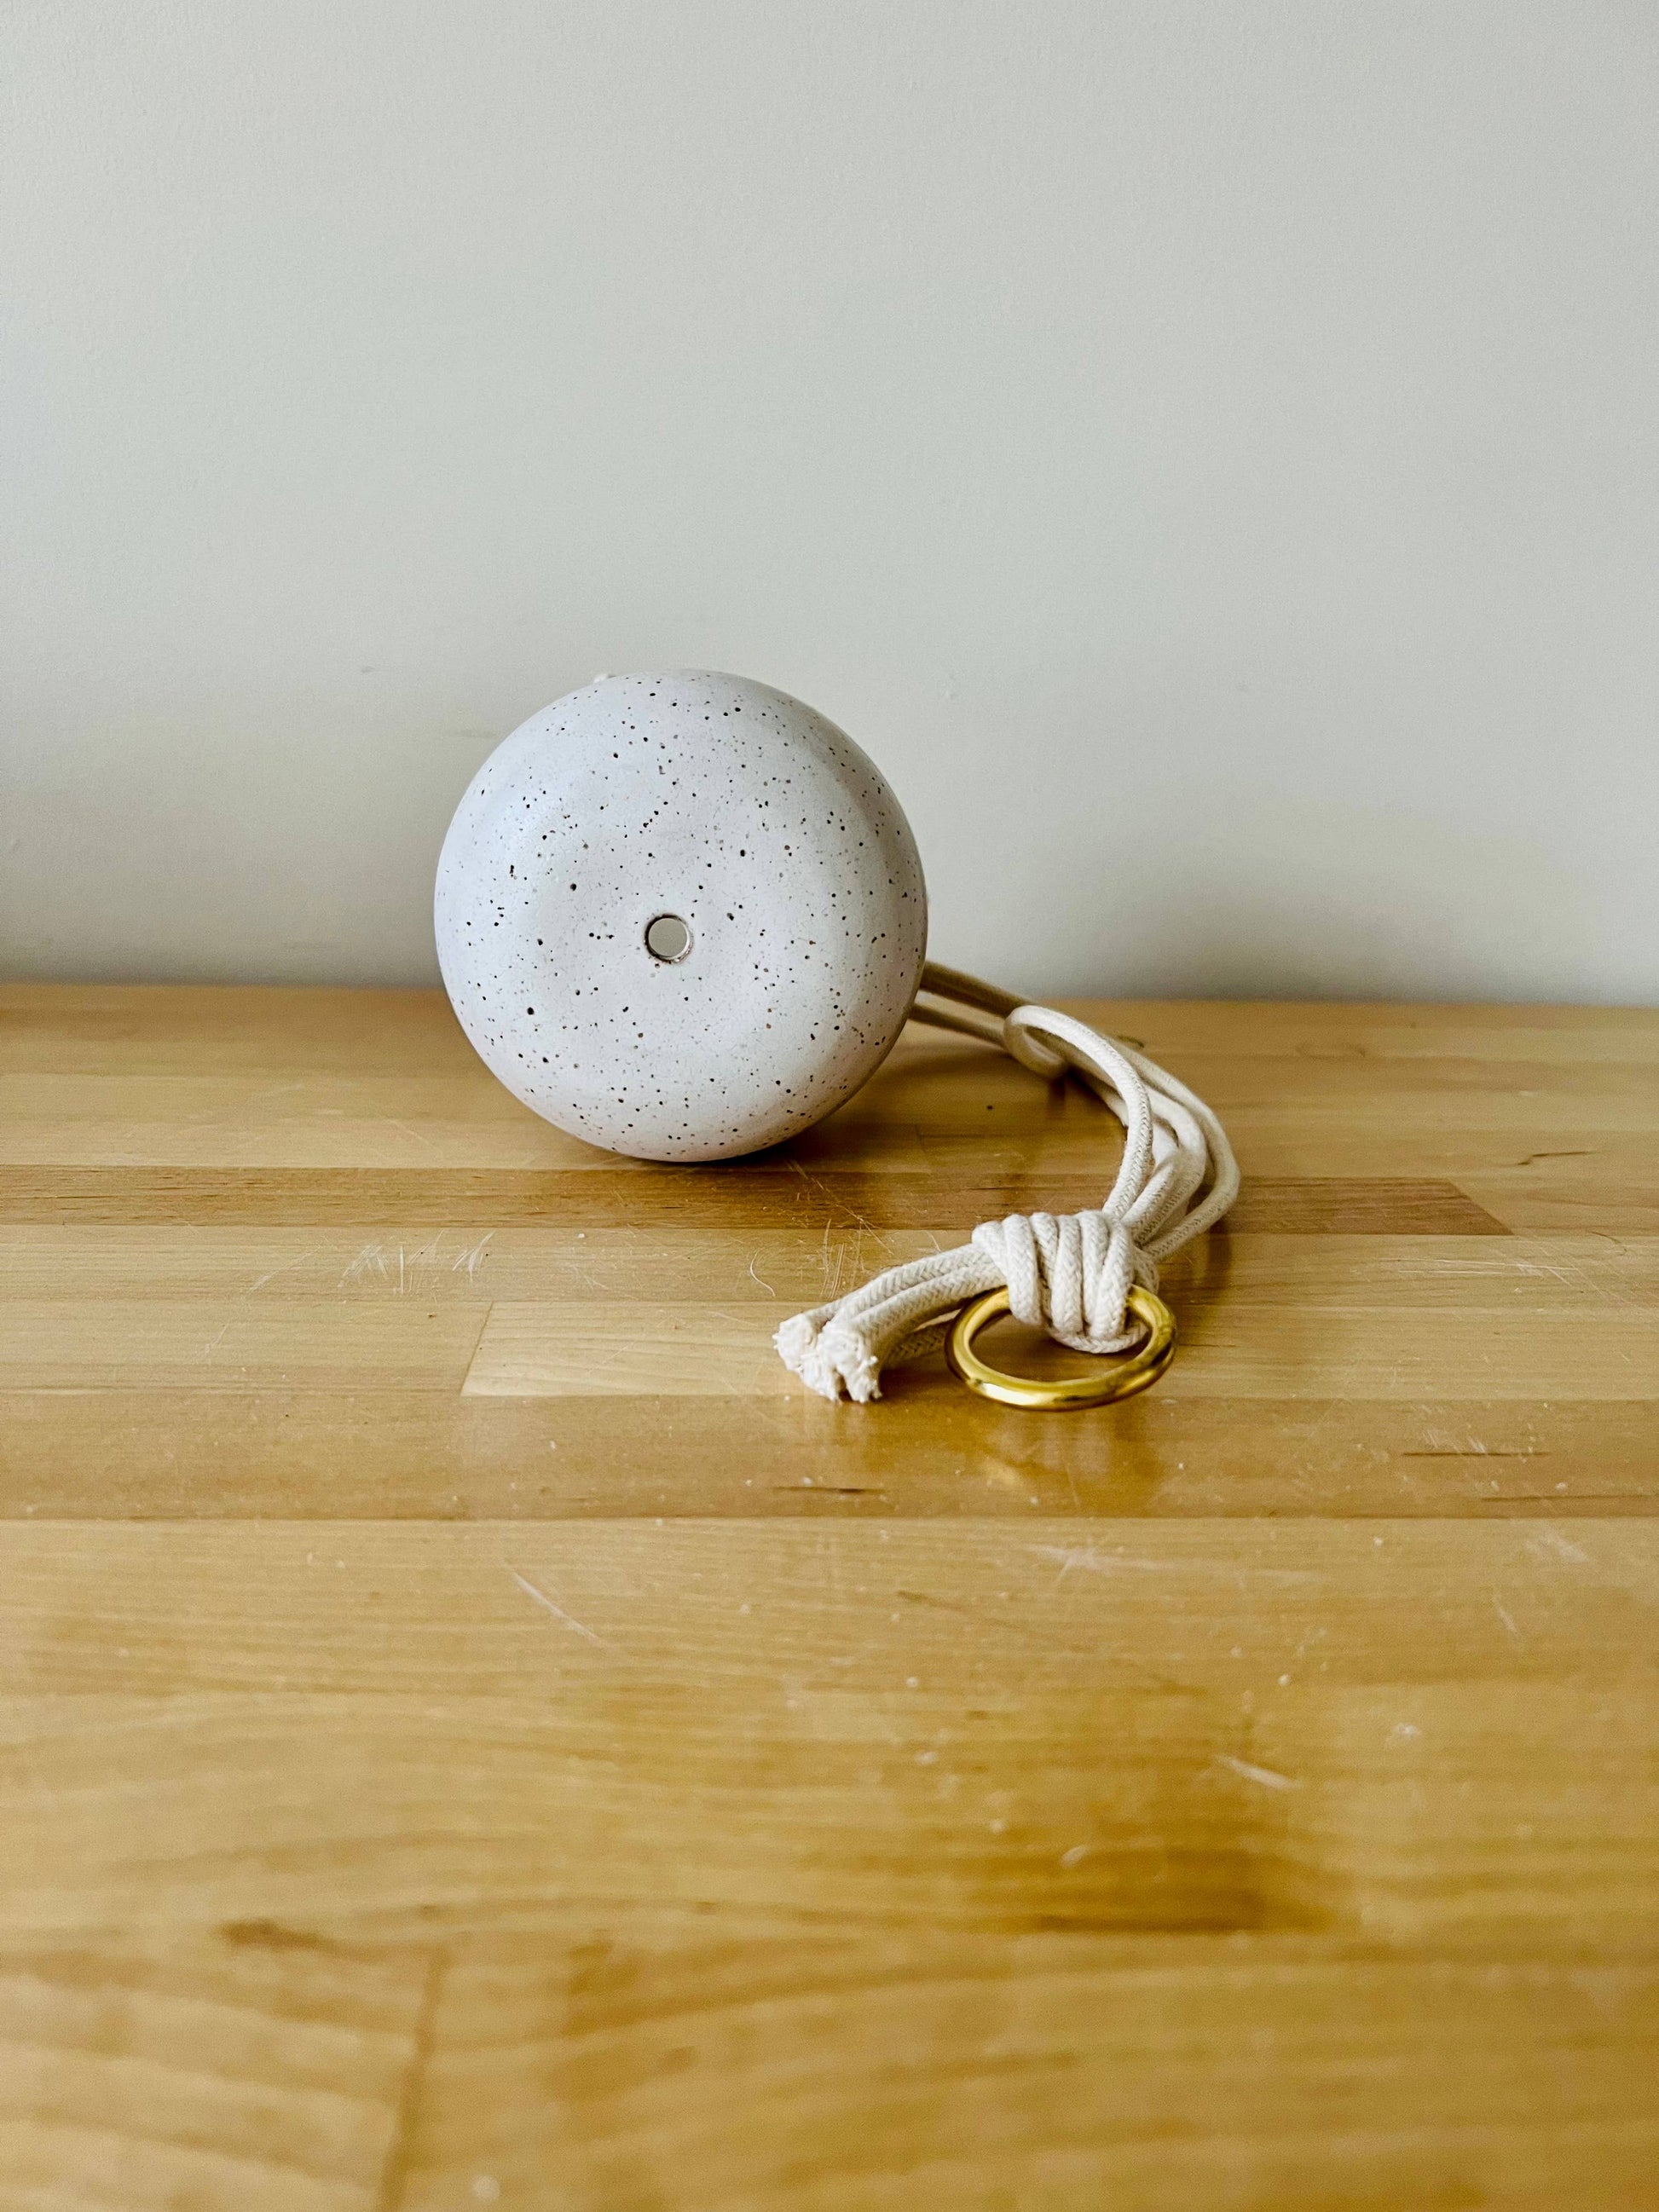 Handmade ceramic planter for your little guys in the home. Earth tone clay with a natural glaze. Includes a drainage hole, cotton cord, and 1" brass ring.